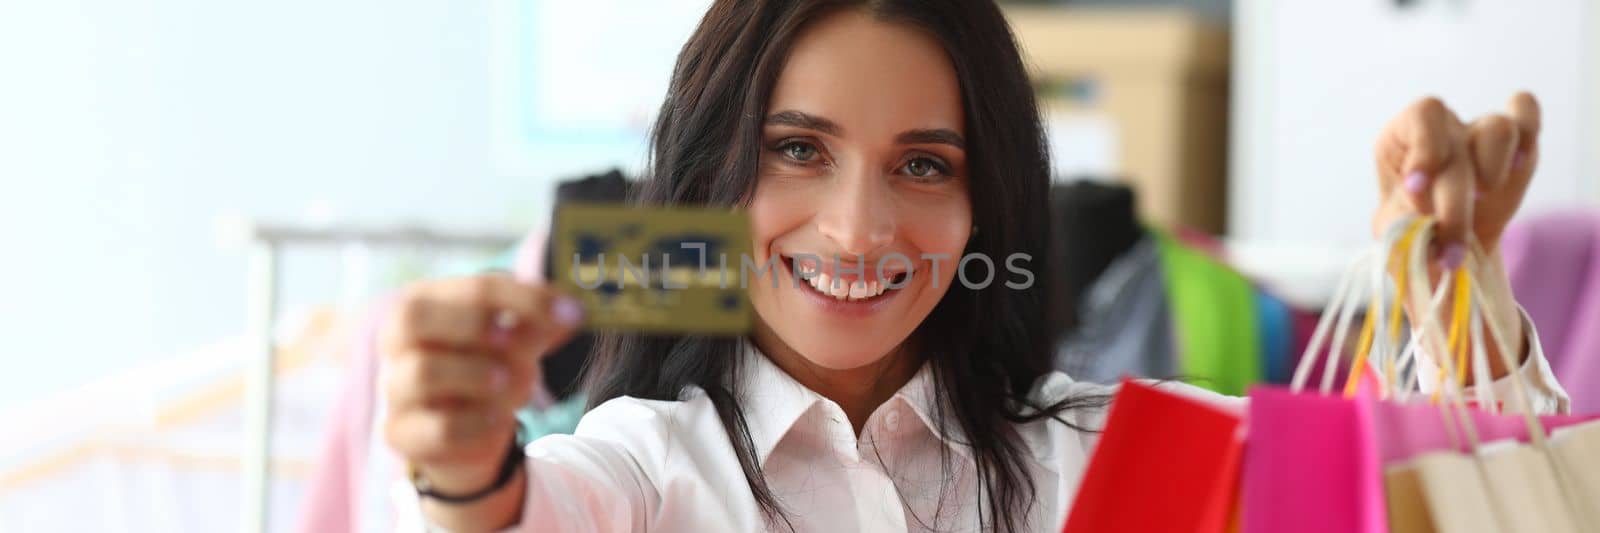 Portrait of woman holding shopping bags in store with bank credit card by kuprevich